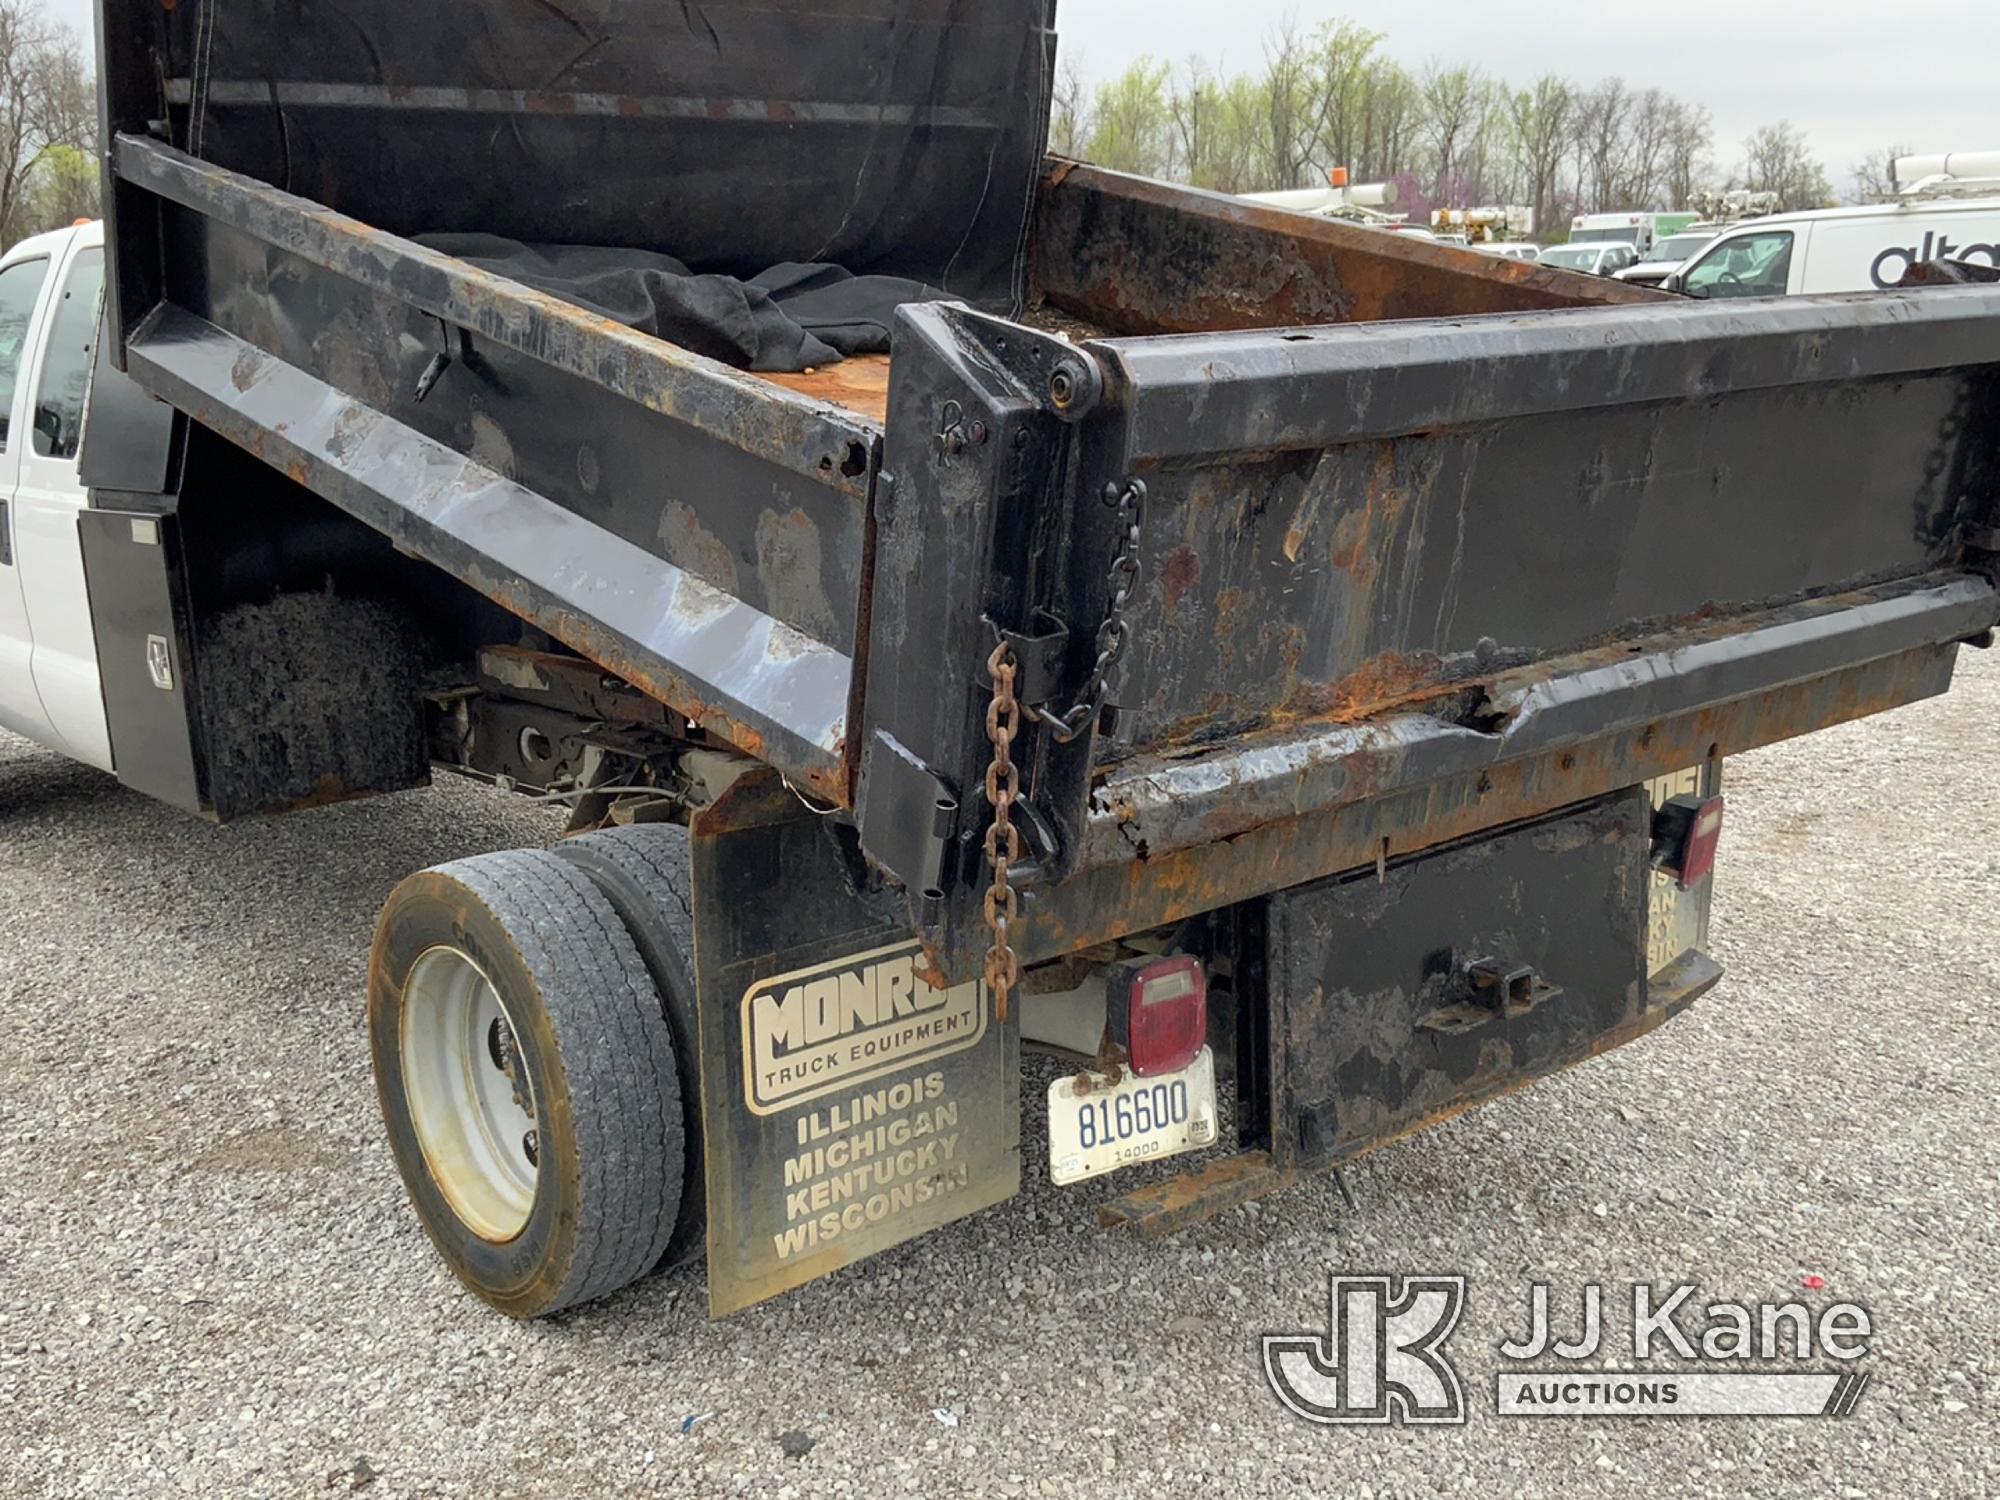 (Verona, KY) 2014 Ford F450 4x4 Extended-Cab Dump Truck Runs, Moves & Operates) (Rust Damage